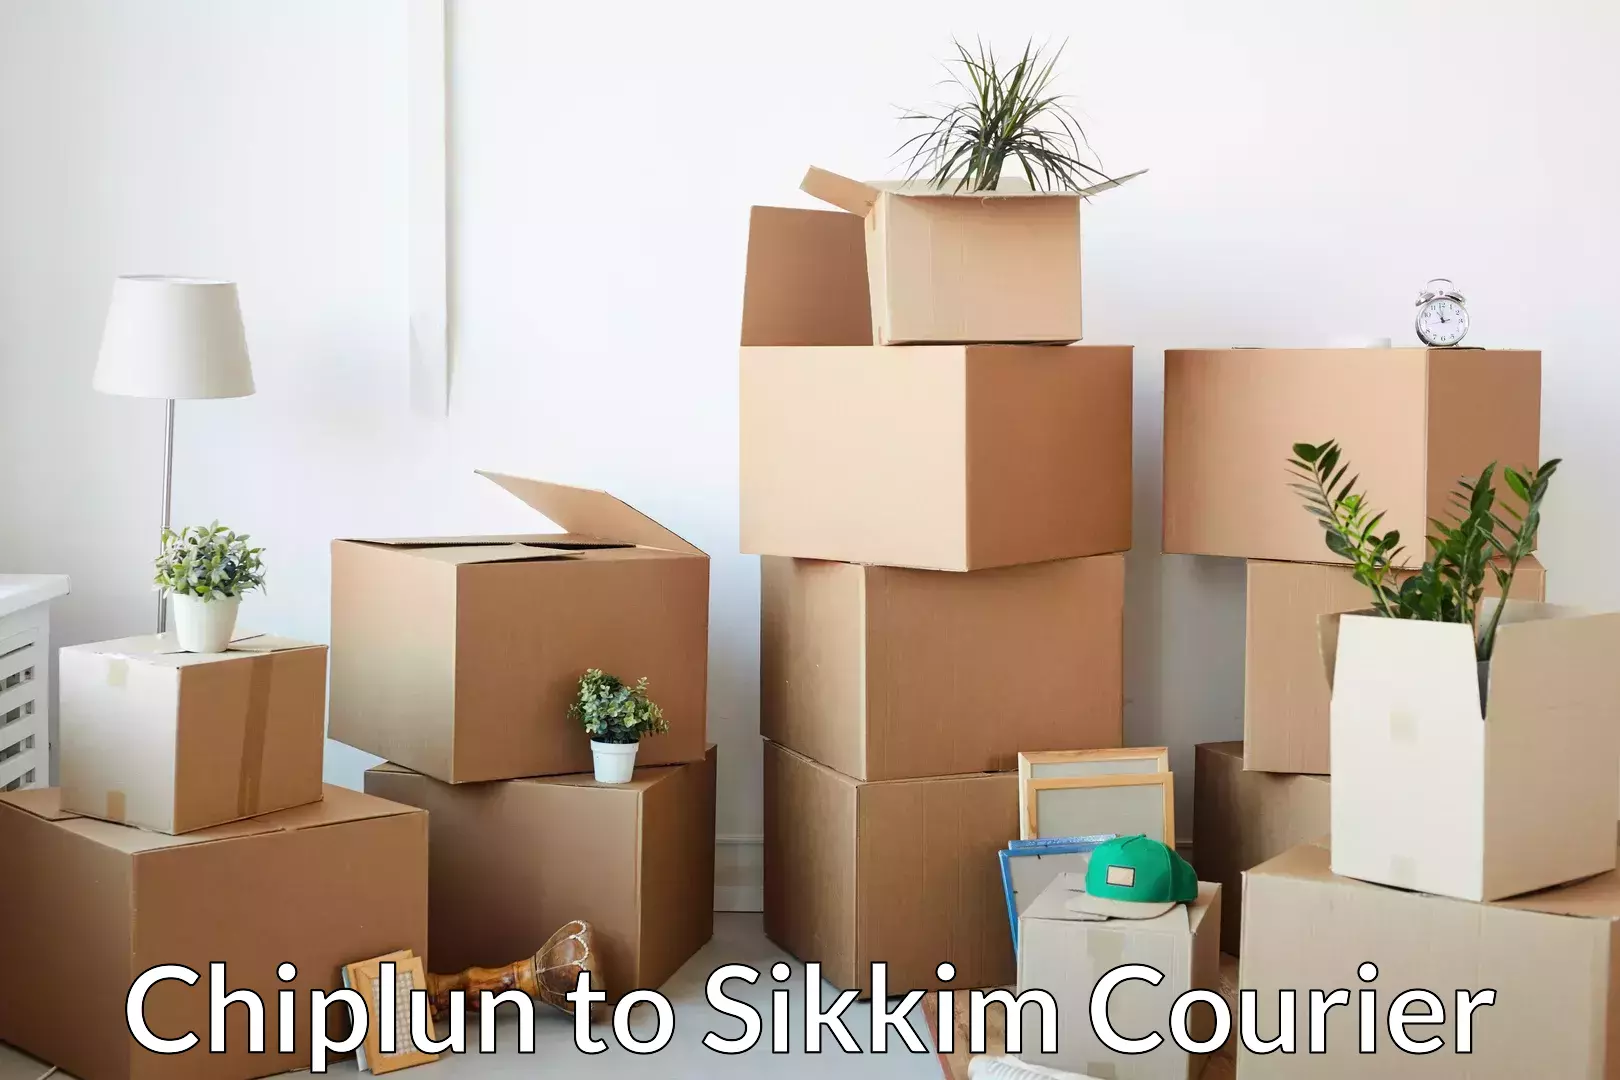 Skilled furniture transporters Chiplun to Sikkim